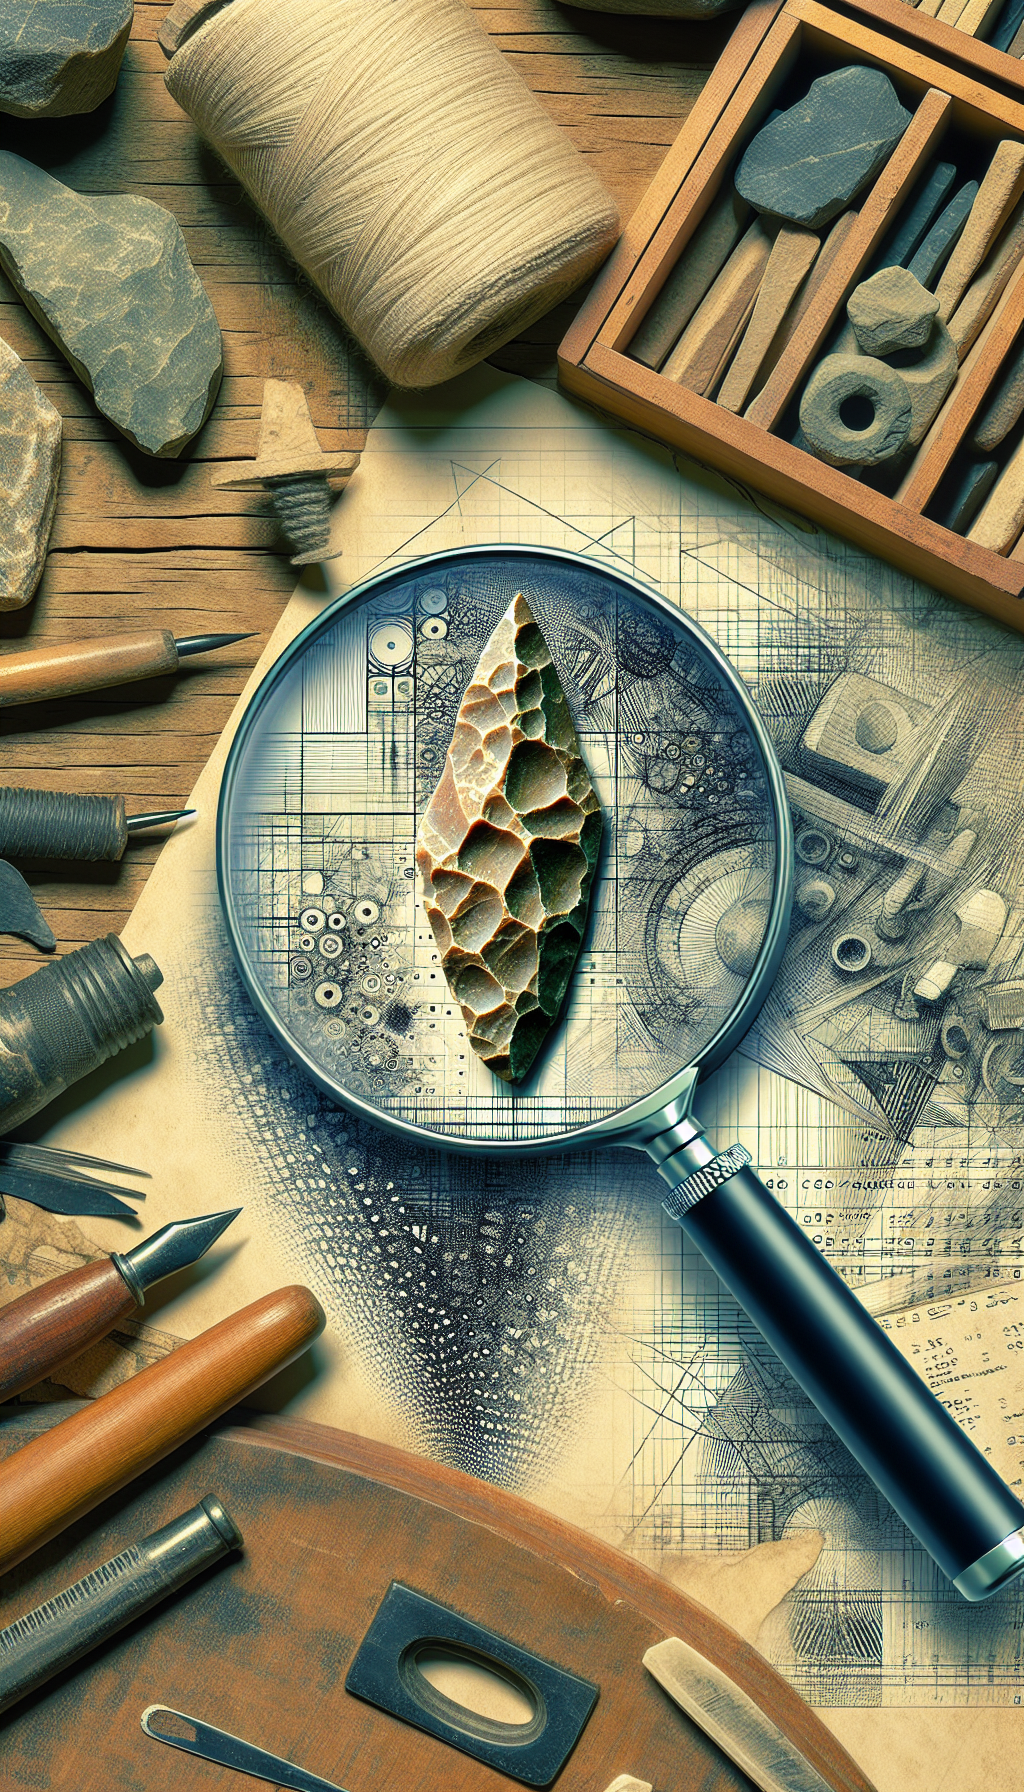 An illustration depicts an archaeologist's desk with a magnifying glass focusing on a stone tool, the intricate flake patterns highlighted by delicate lines and numbers indicating measurement. The background subtly transitions from a realistic drawing on the left to pixelated digital analysis on the right, merging ancient craftsmanship with modern identification techniques.